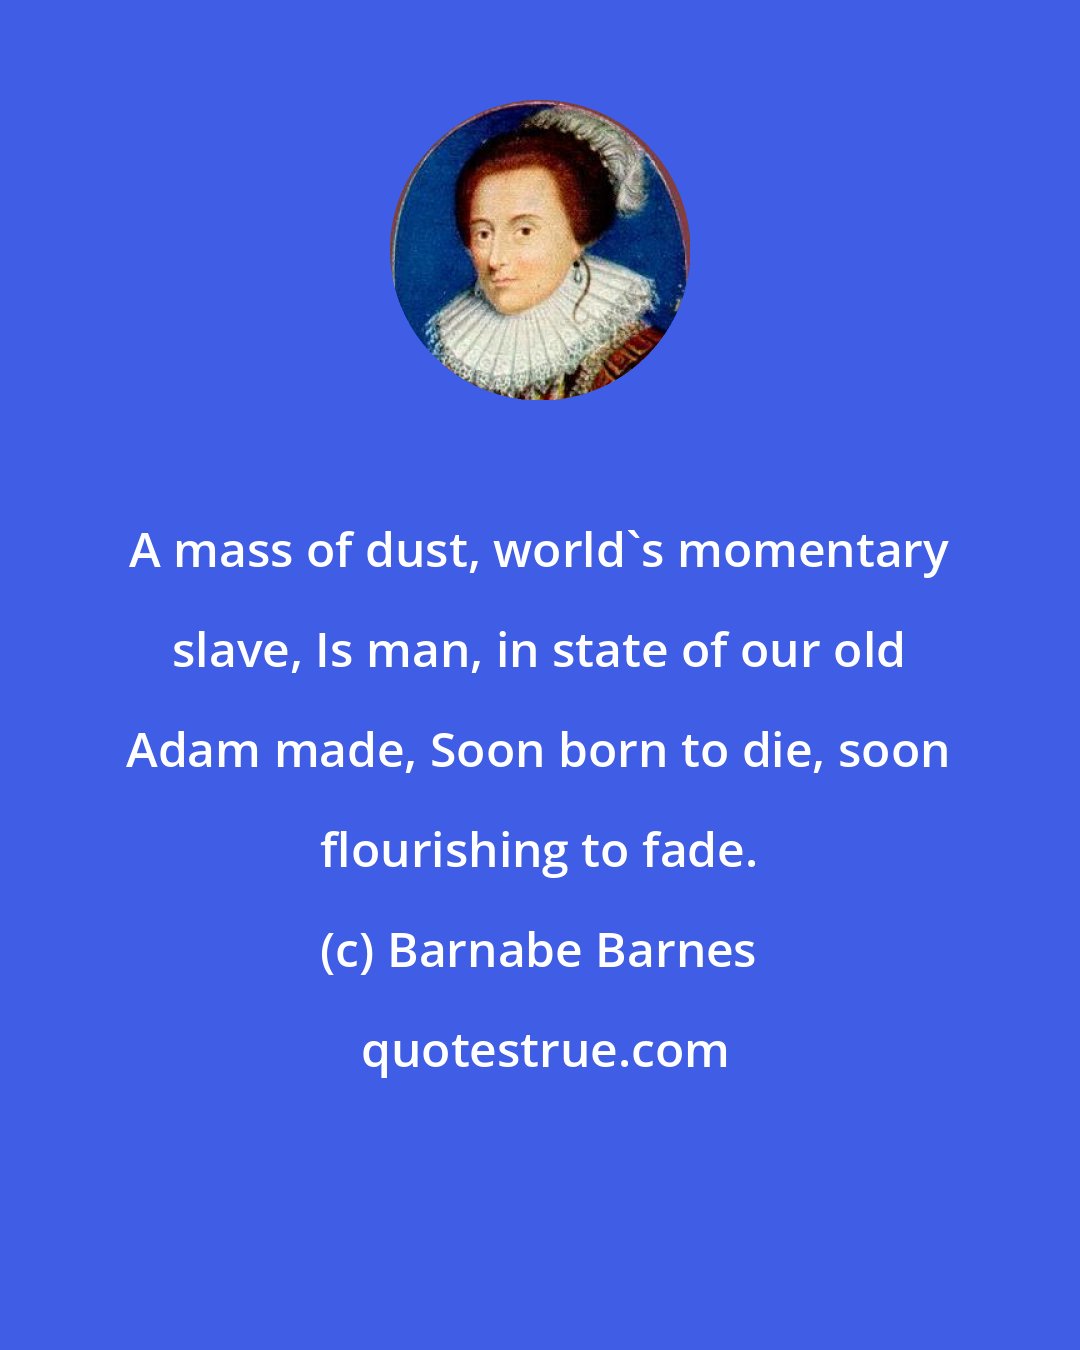 Barnabe Barnes: A mass of dust, world's momentary slave, Is man, in state of our old Adam made, Soon born to die, soon flourishing to fade.